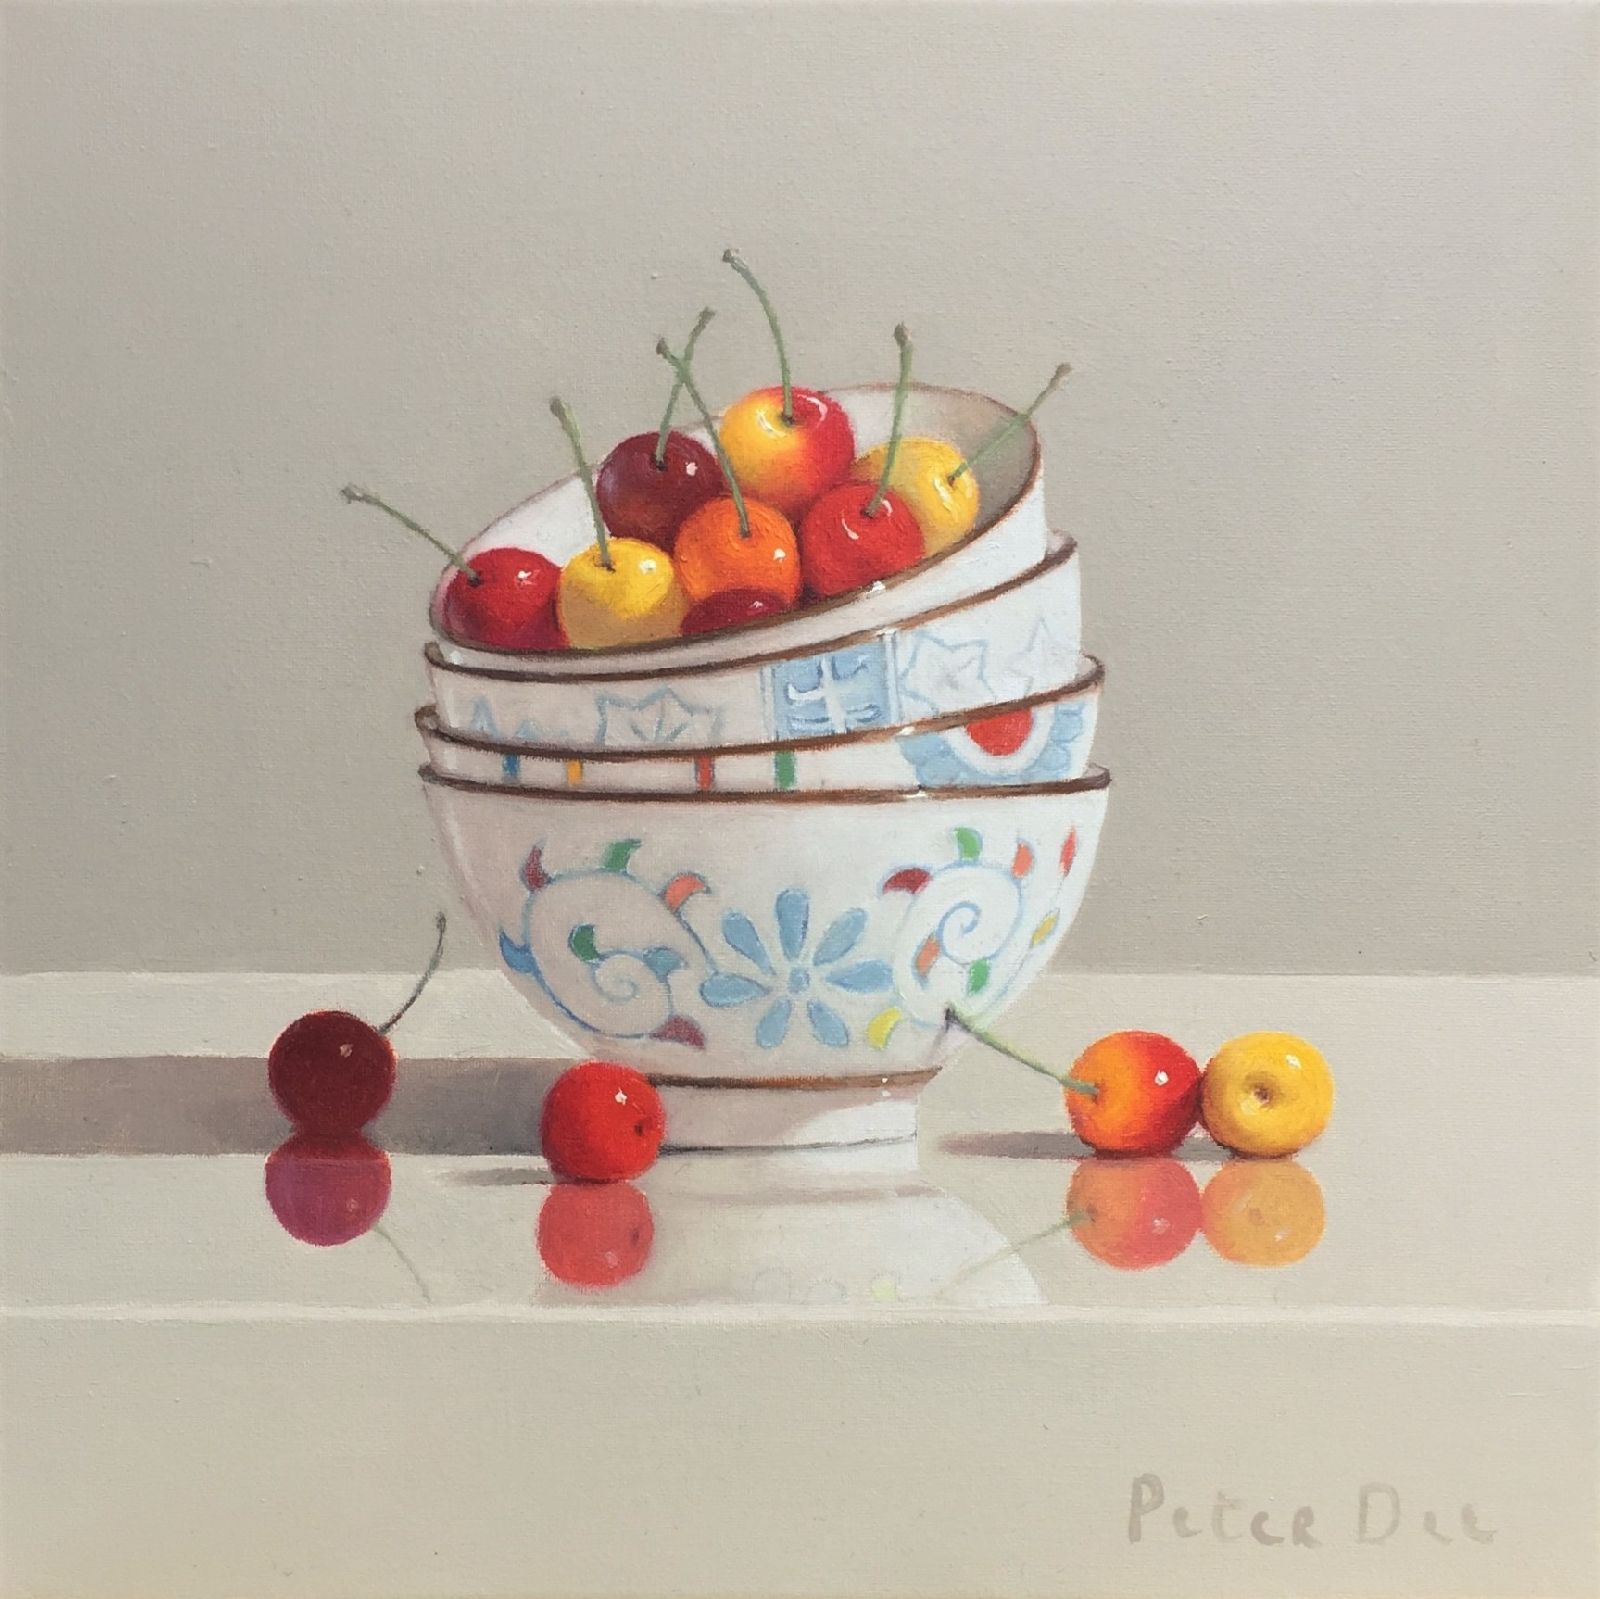 Peter Dee - Stacked Bowls with Cherries